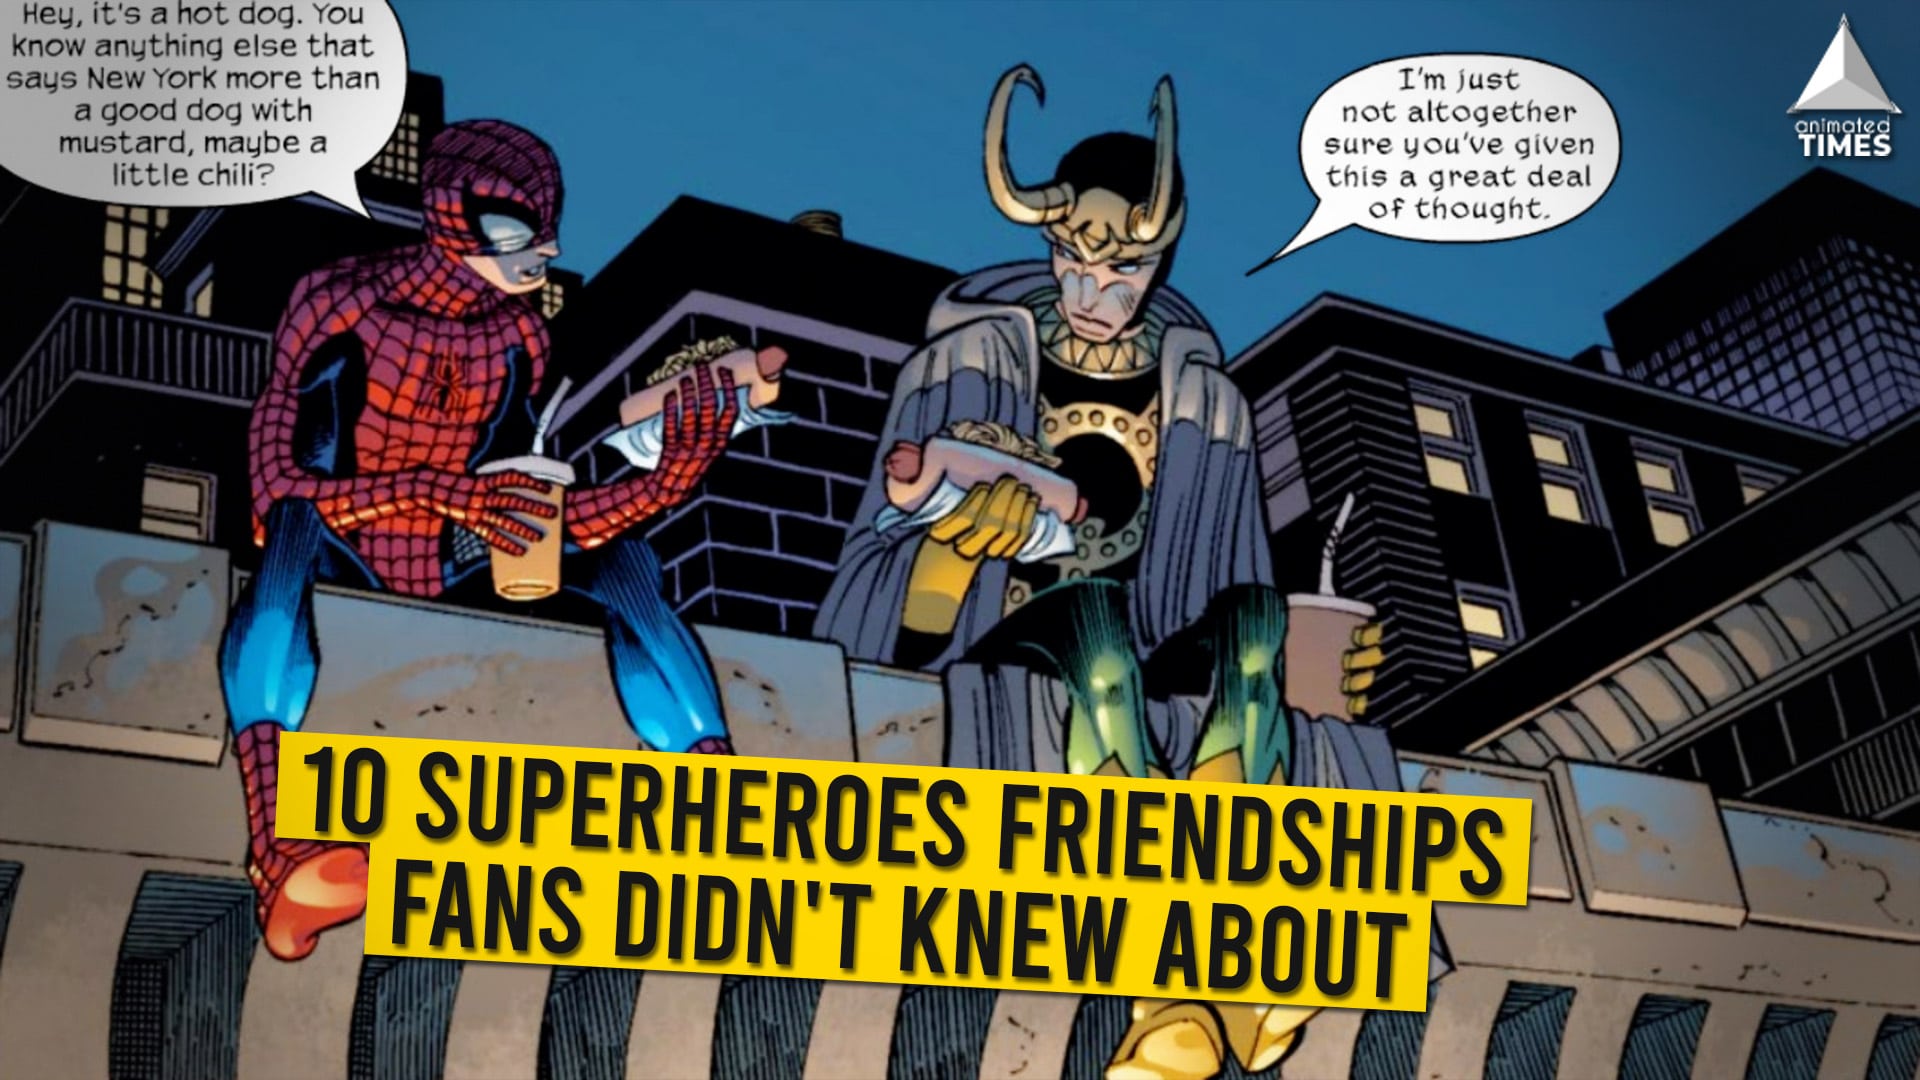 10 Superheroes Friendships Fans Didn’t Knew About.